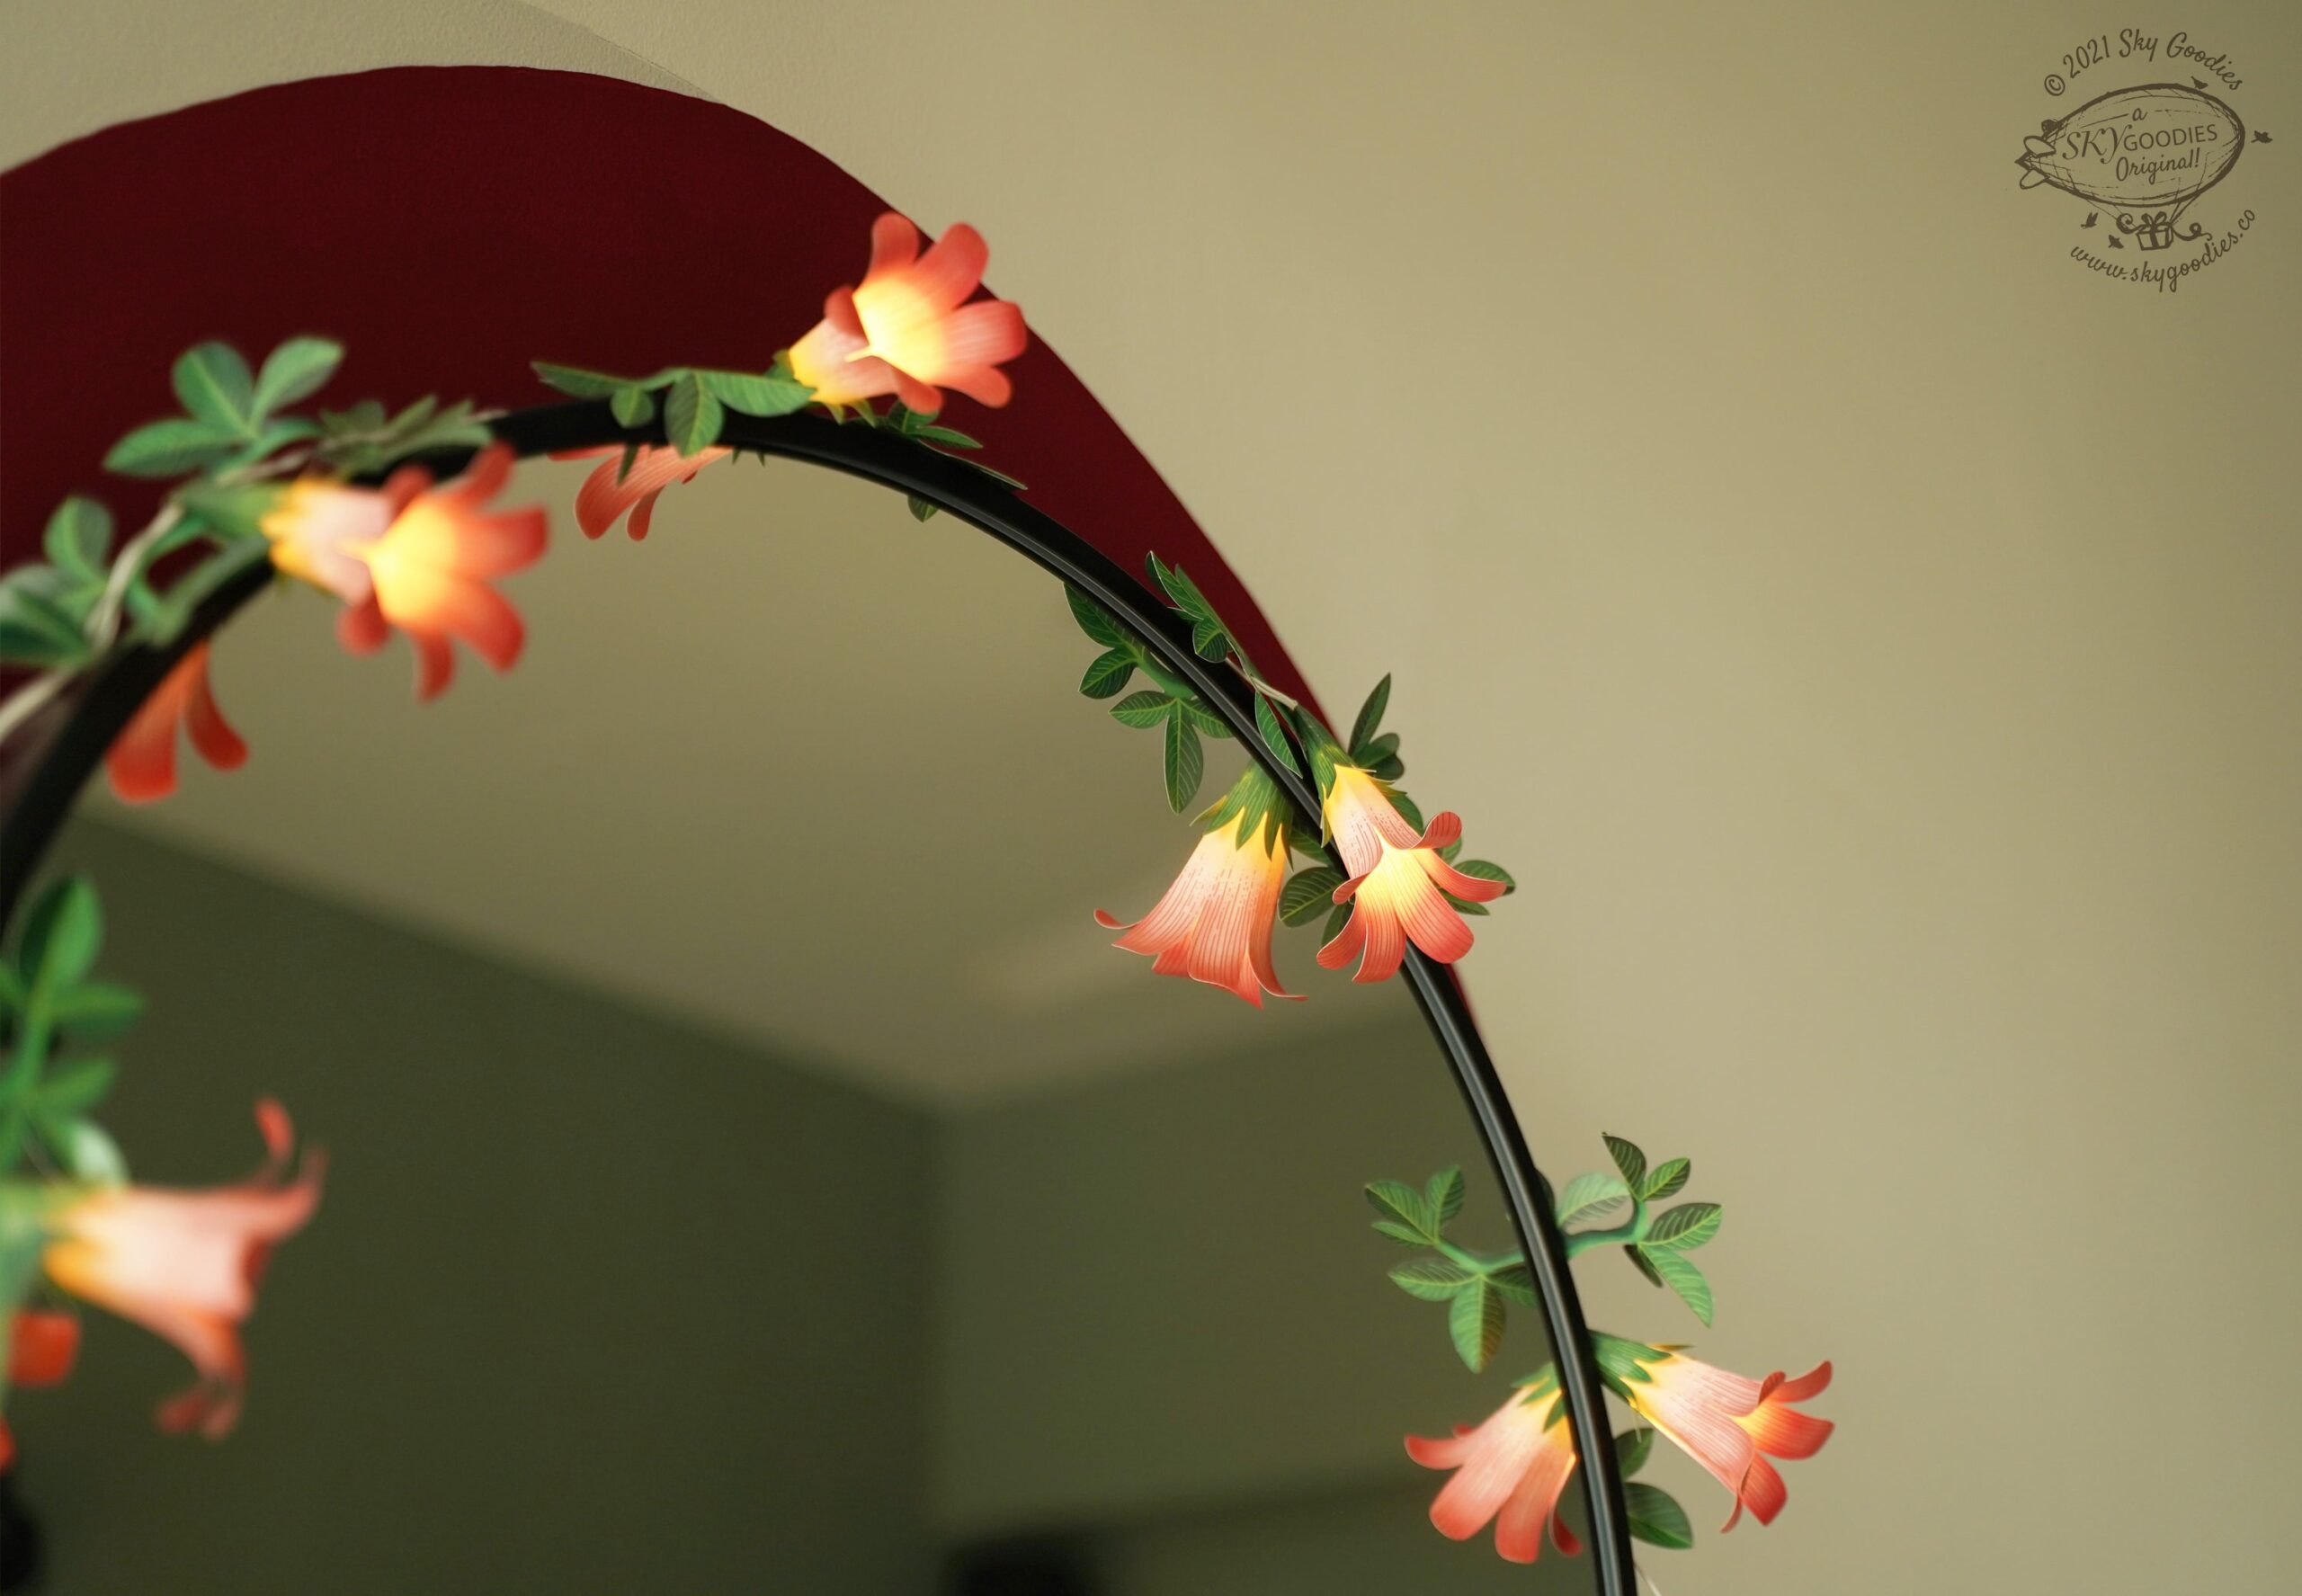 Floral paper flower fairy lights to bring a touch of nature into your home